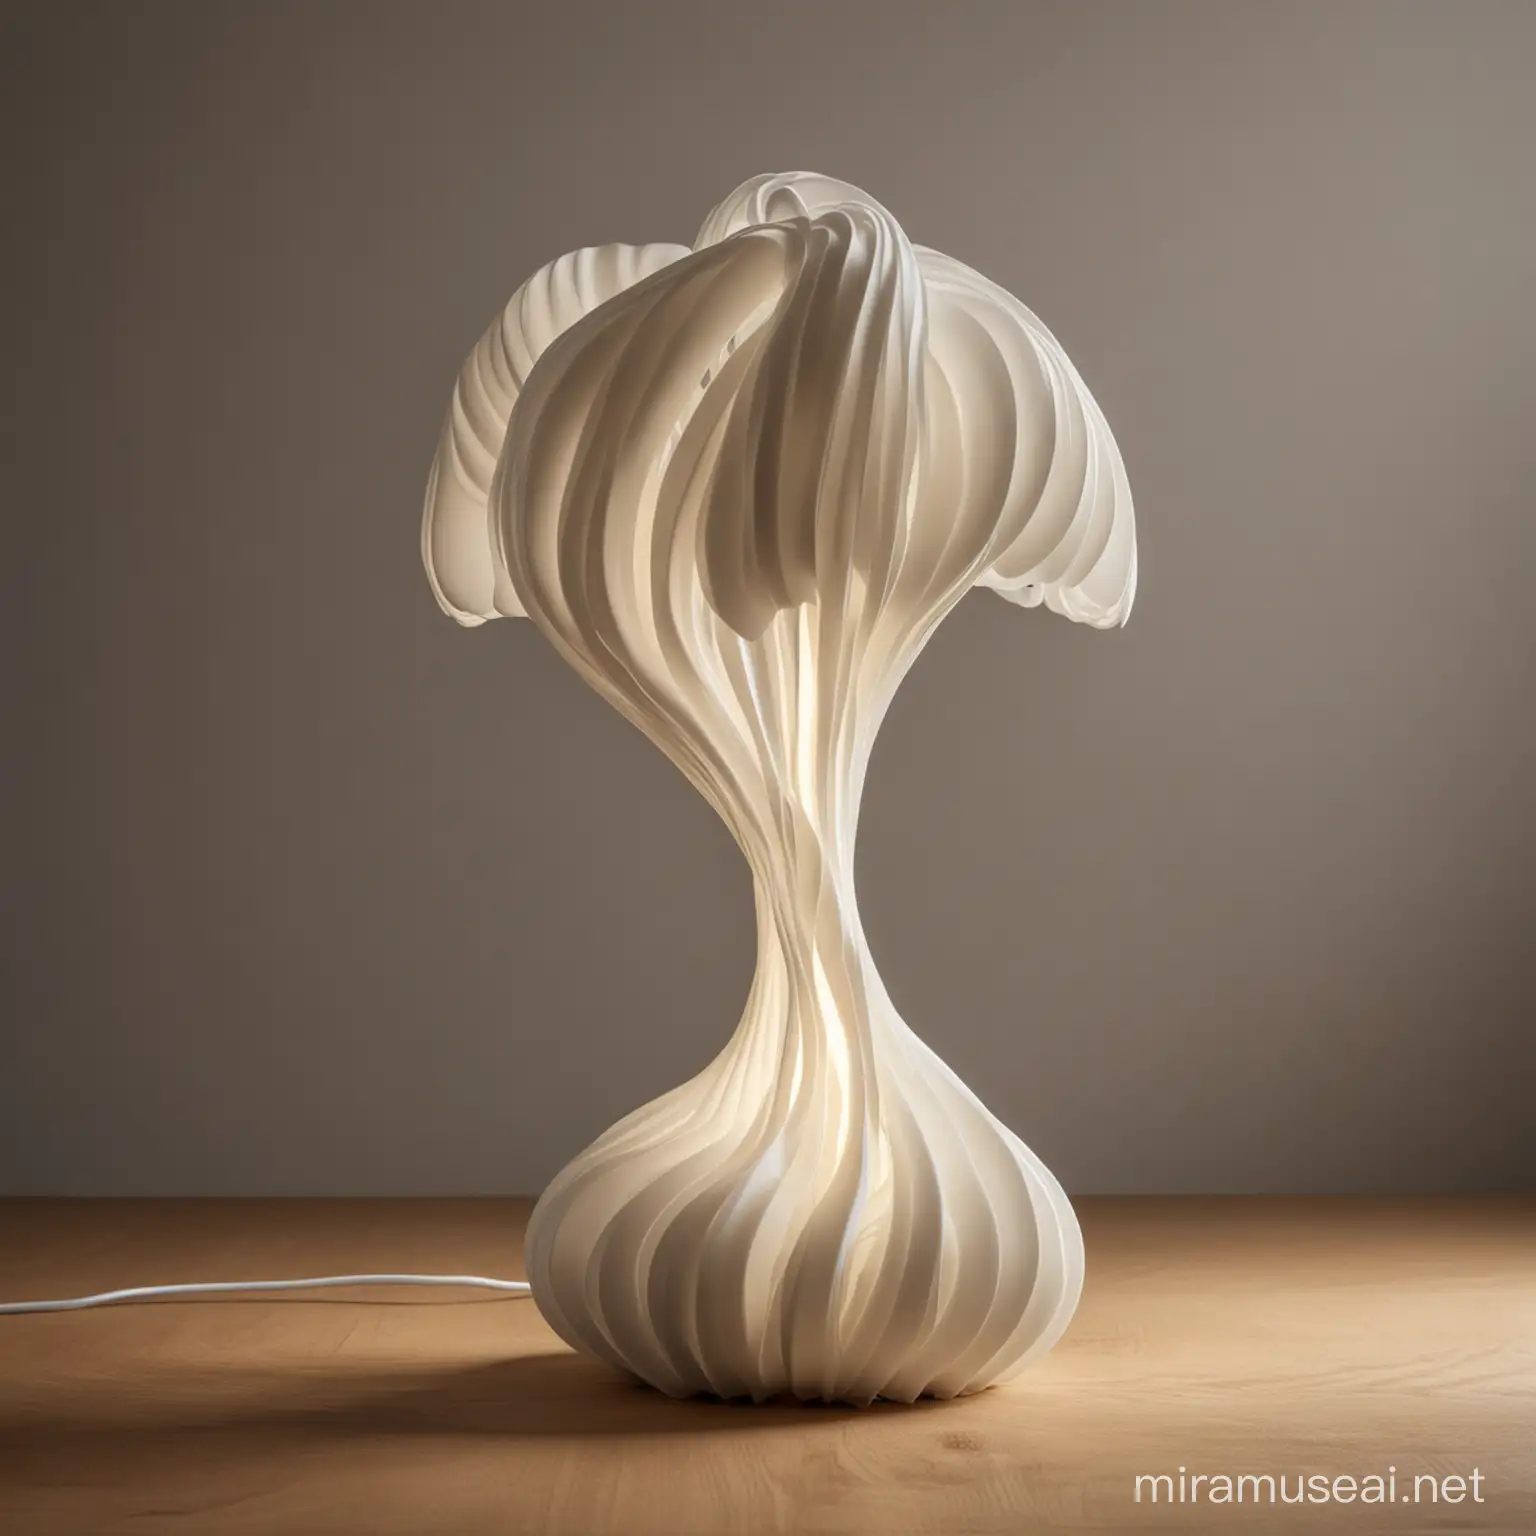 3D Printed Ron AradStyle Free Form Lamp with Cinematic Depth of Field